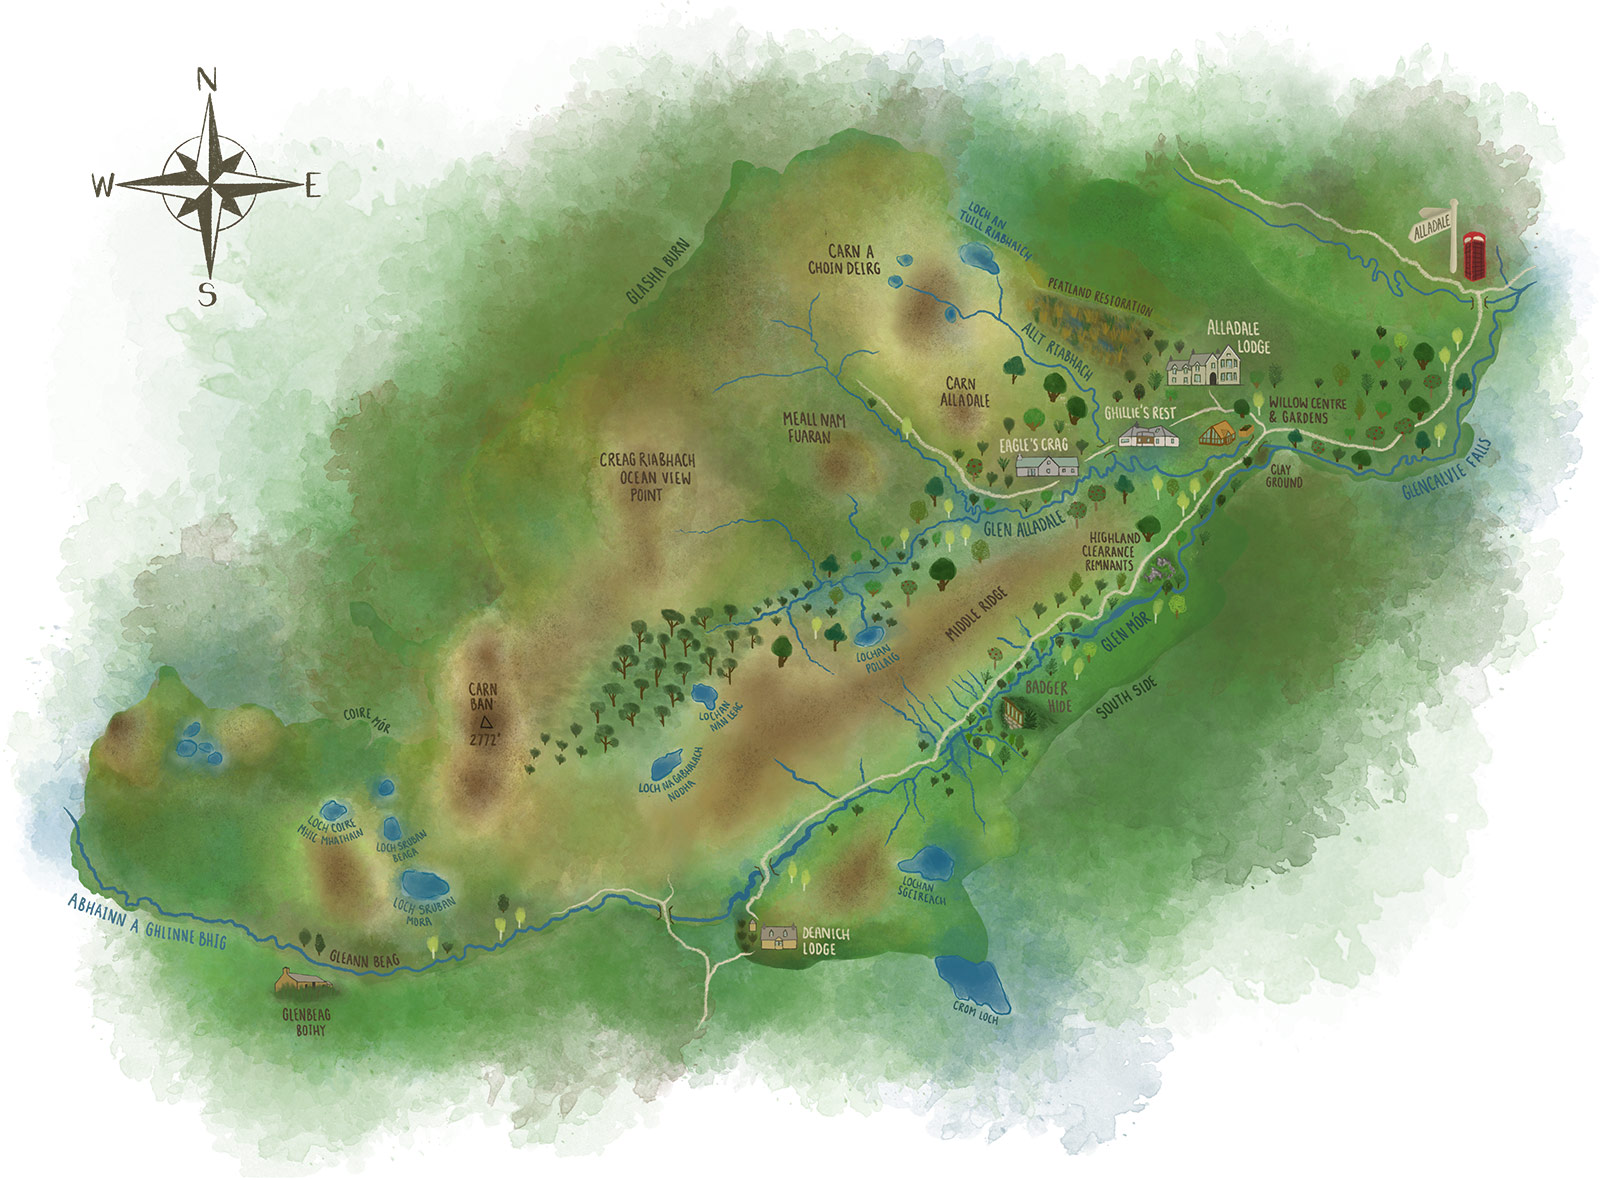 Illustrated map of the reserve, revealing where the various lodges are located.